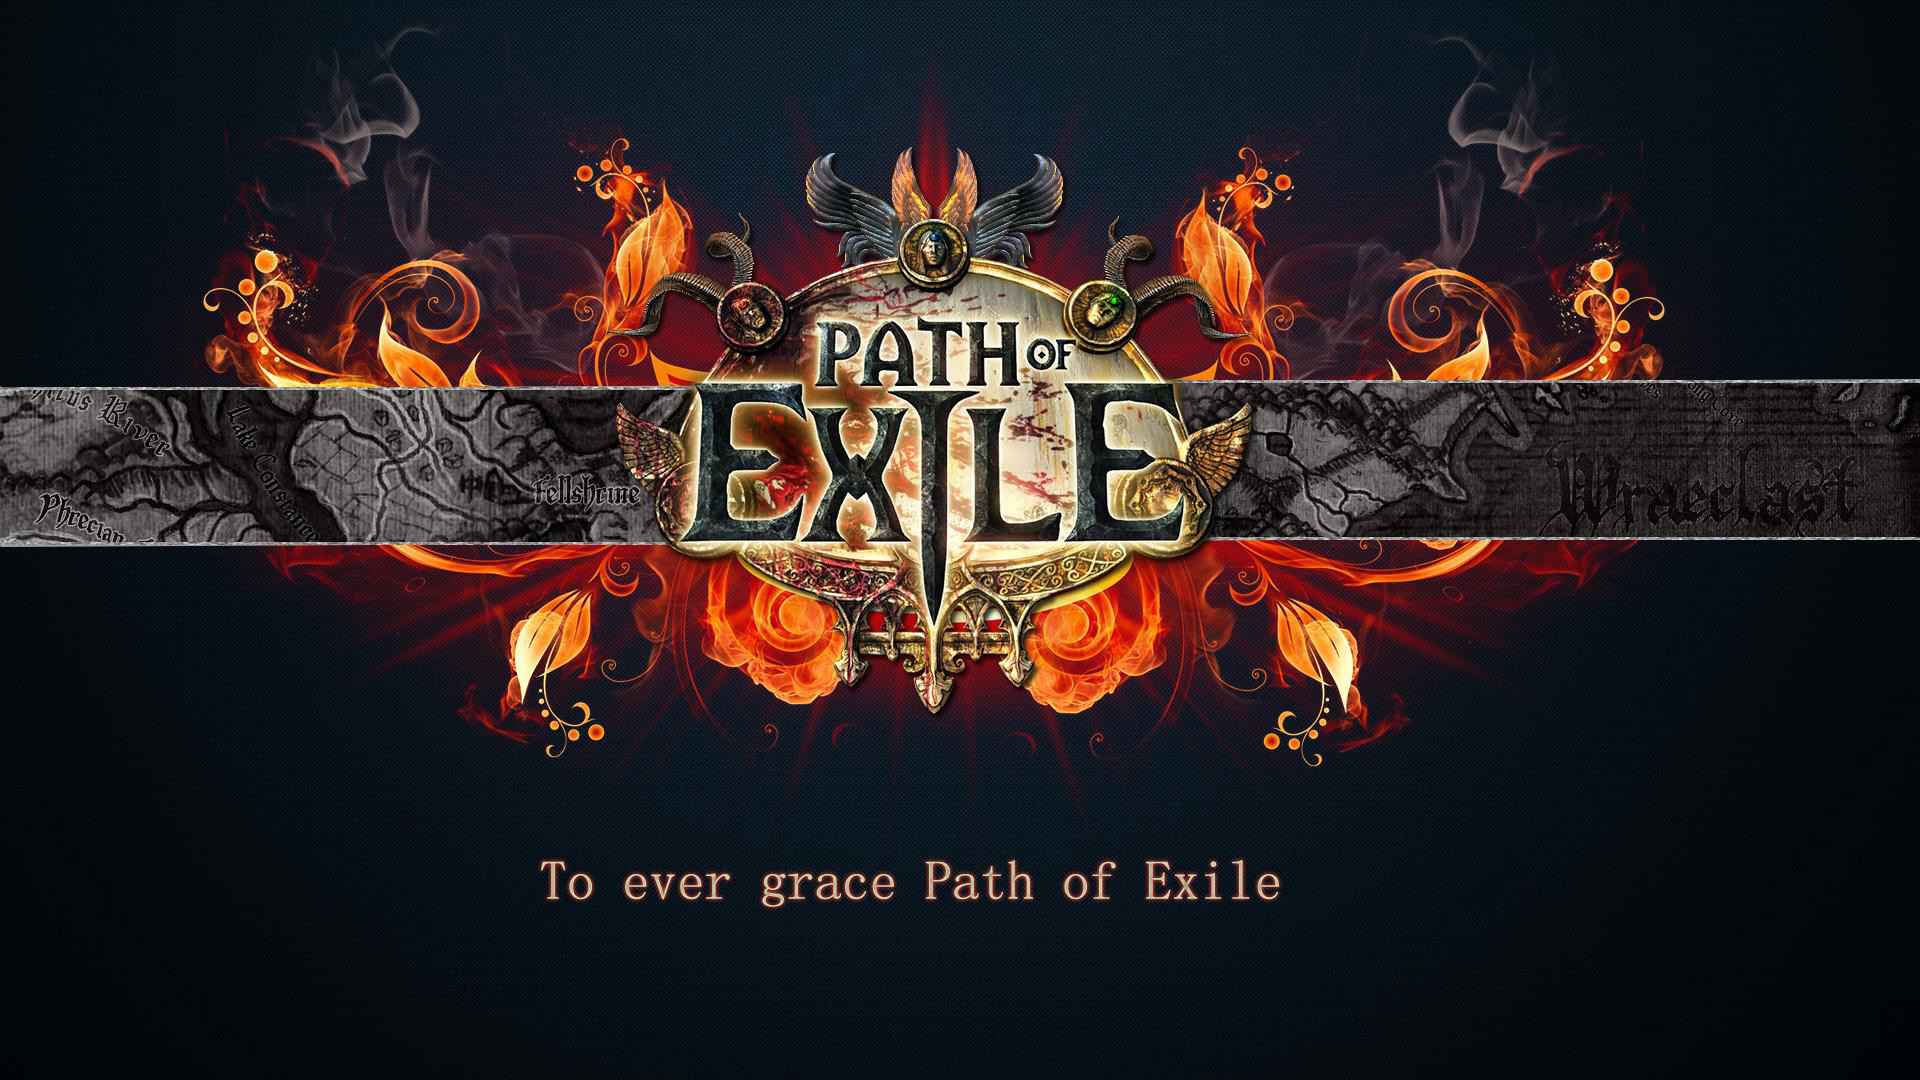 To ever grace Path of Exile